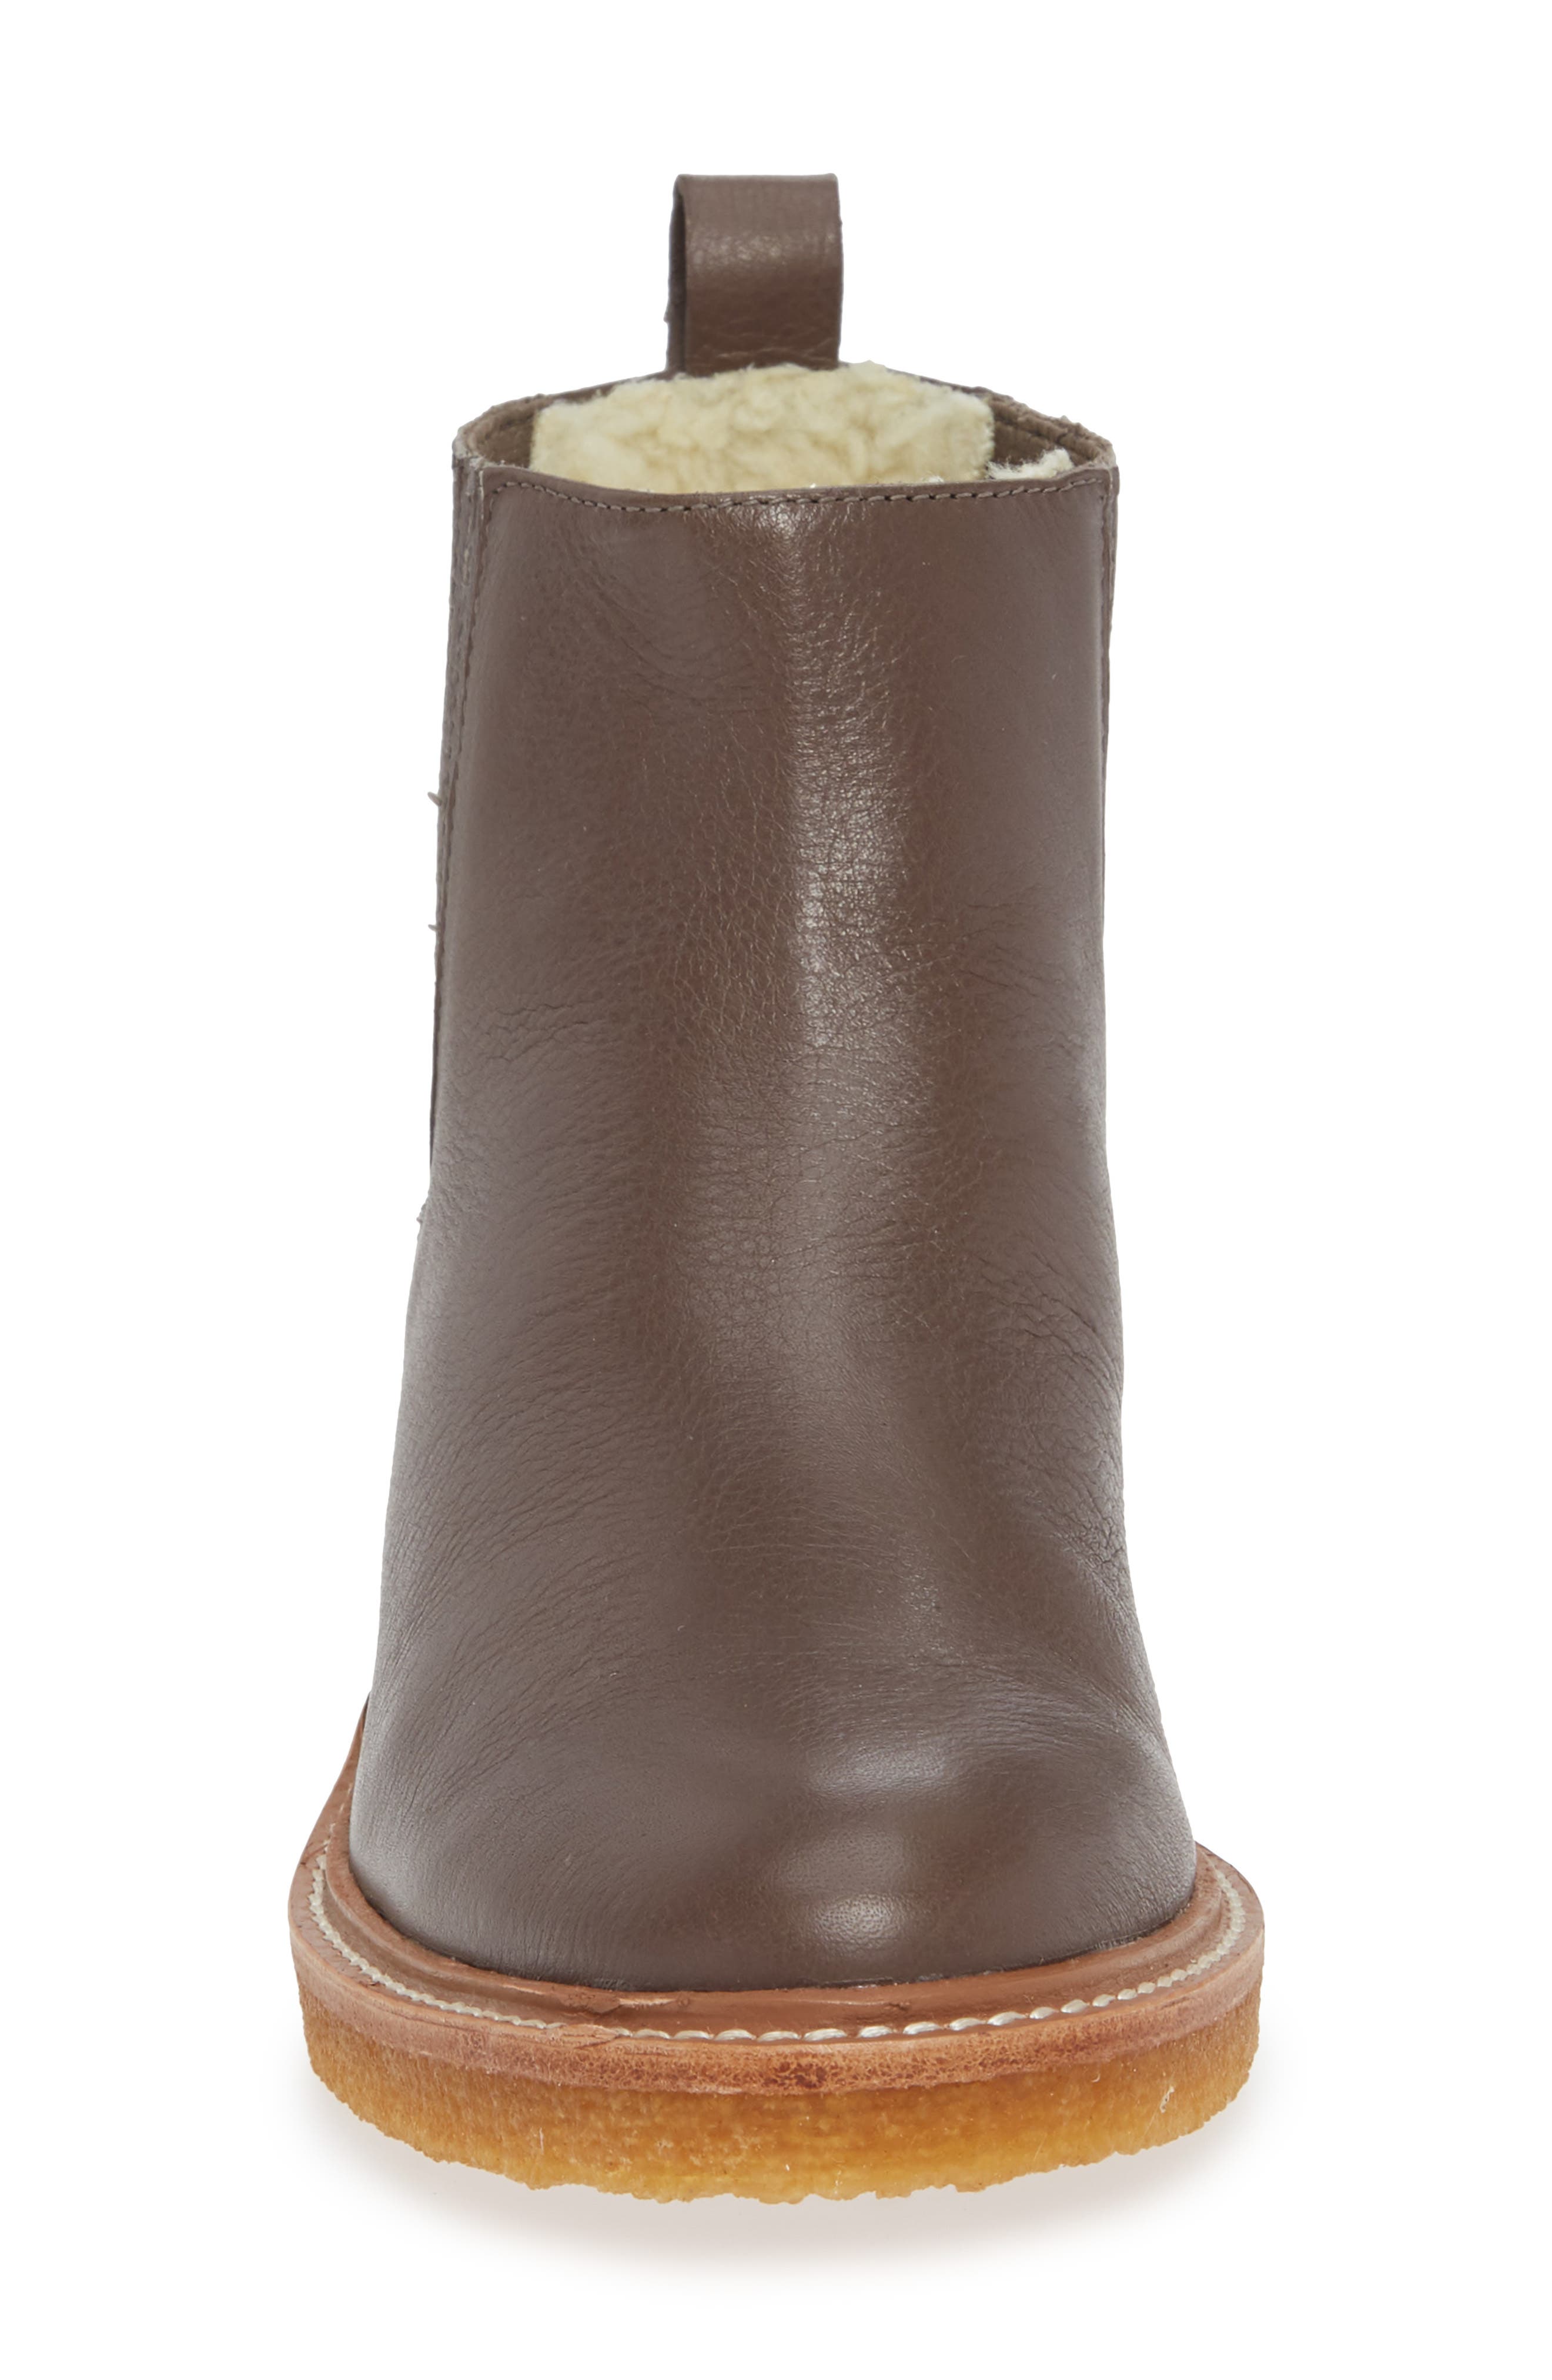 botkier chelsea faux shearling lined boot